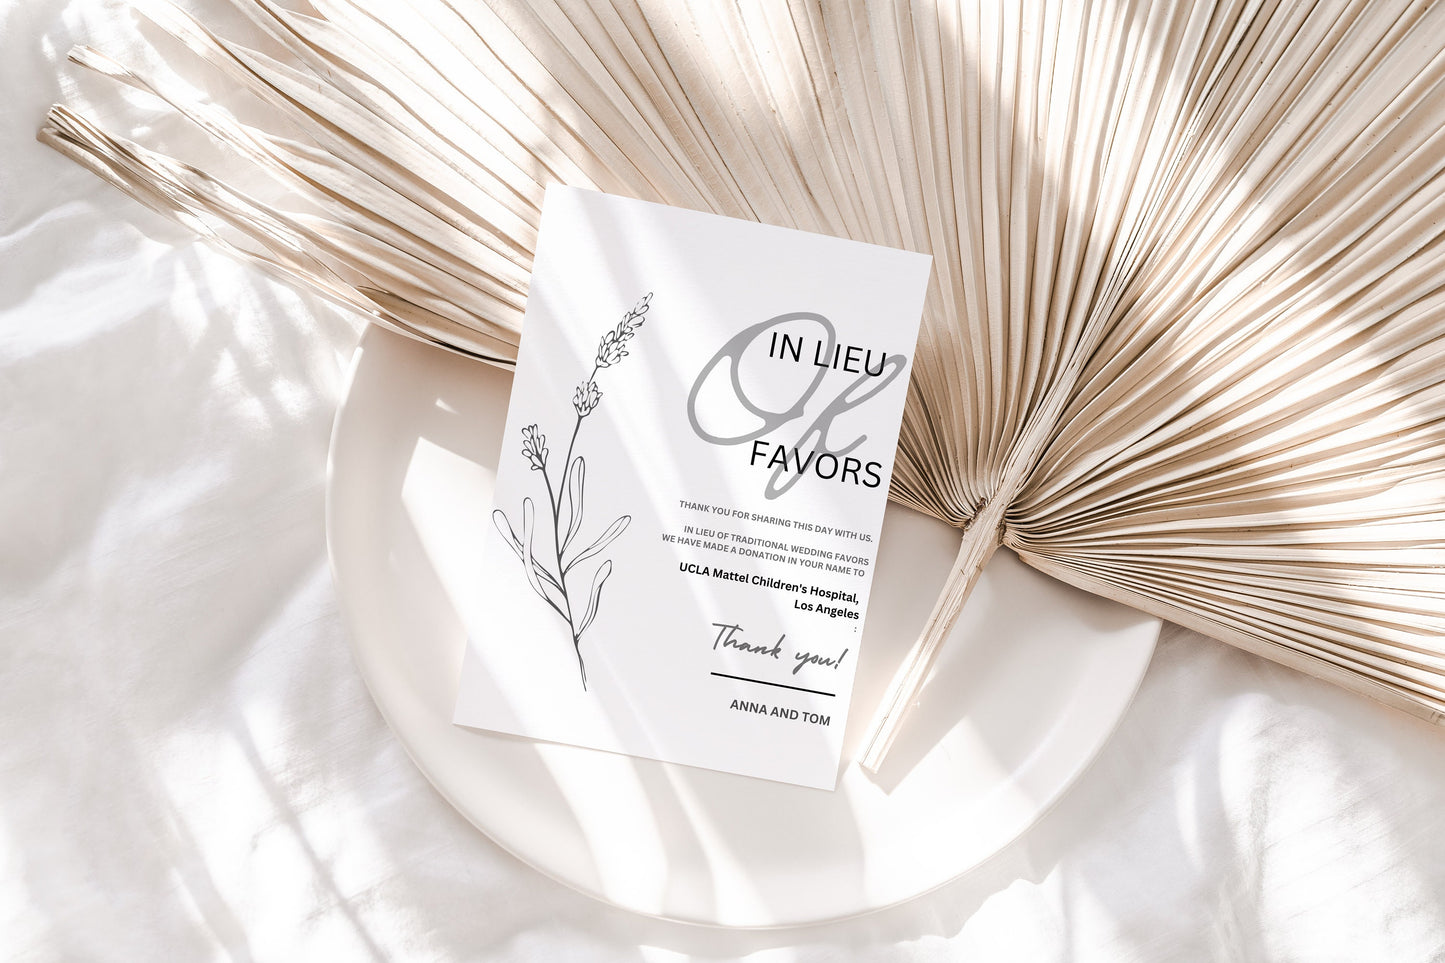 In Lieu of Favors Sign Template, Minimalist Favors Sign, In Lieu of Favours Sign, Modern In Lieu of Favors Sign Template, Minimal,  wedding